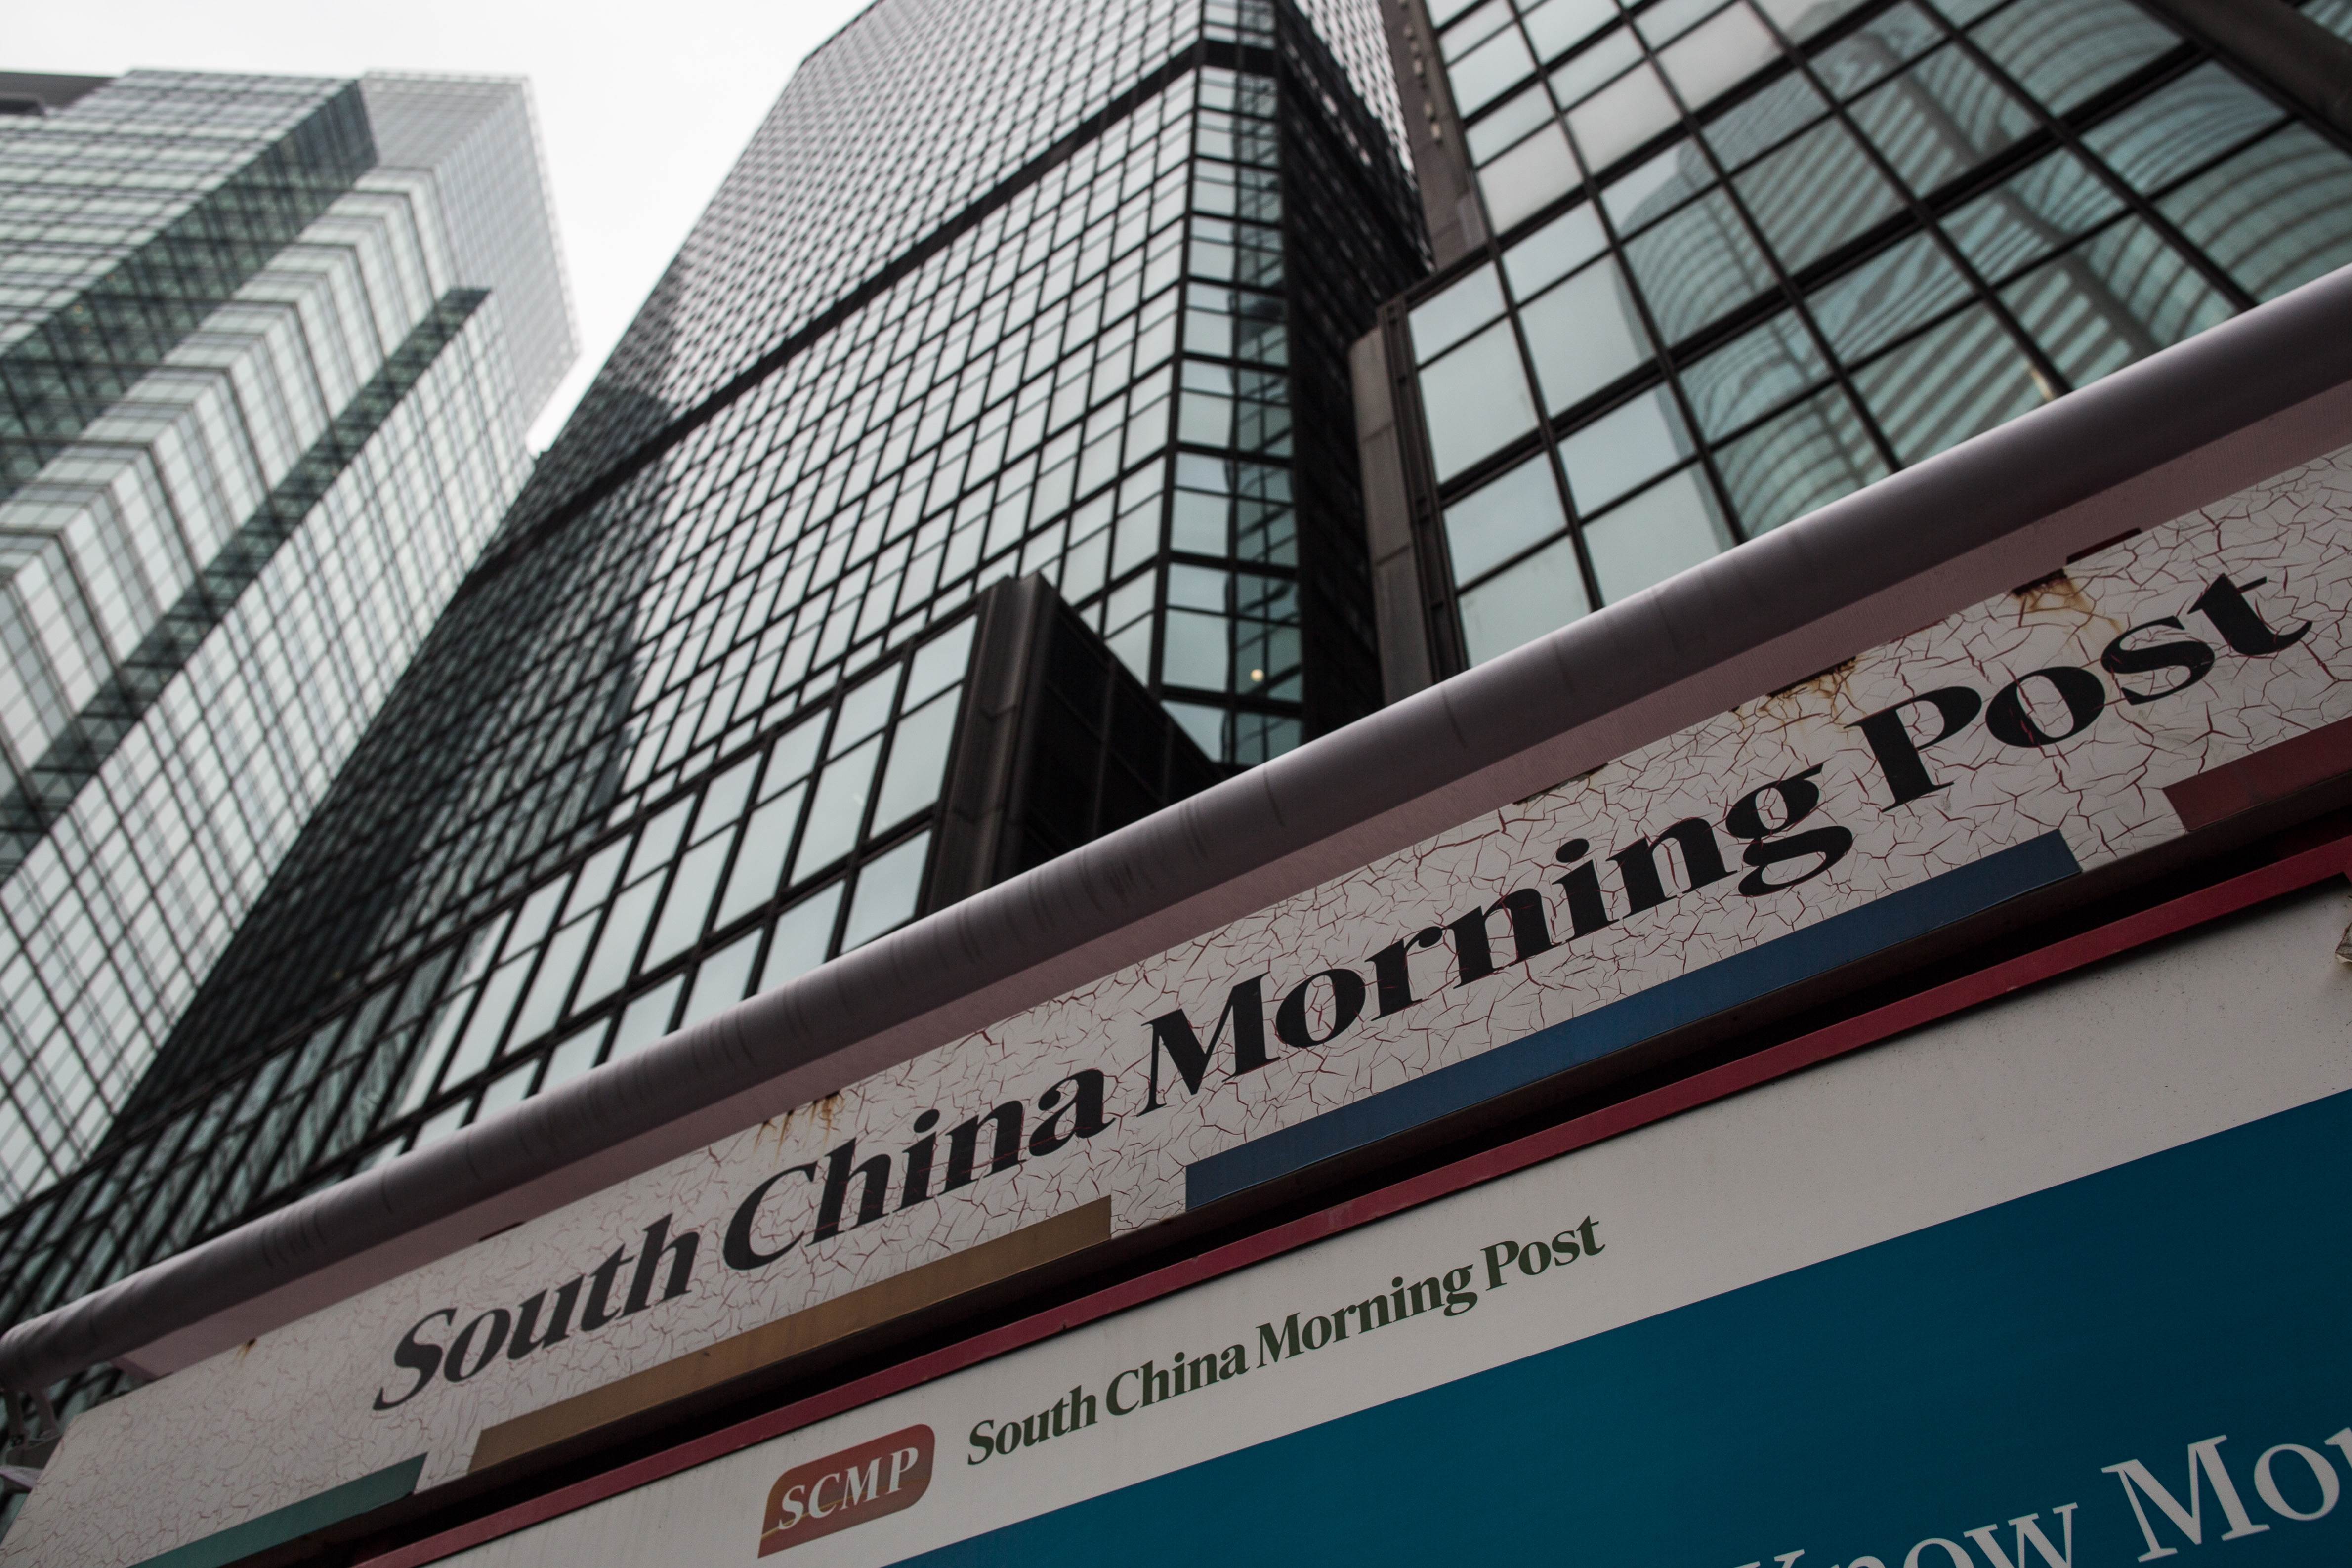 A general view shows a closed newsstand designed with the logo of the South China Morning Post (SCMP) in Hong Kong on December 12, 2015, following its acquisition by Chinese internet giant Alibaba of the English-language newspaper. Alibaba said on December 11 it would buy Hong Kong's South China Morning Post, pledging to maintain the newspaper's objectivity in the face of fears it will lose its independent voice. AFP PHOTO / ANTHONY WALLACE